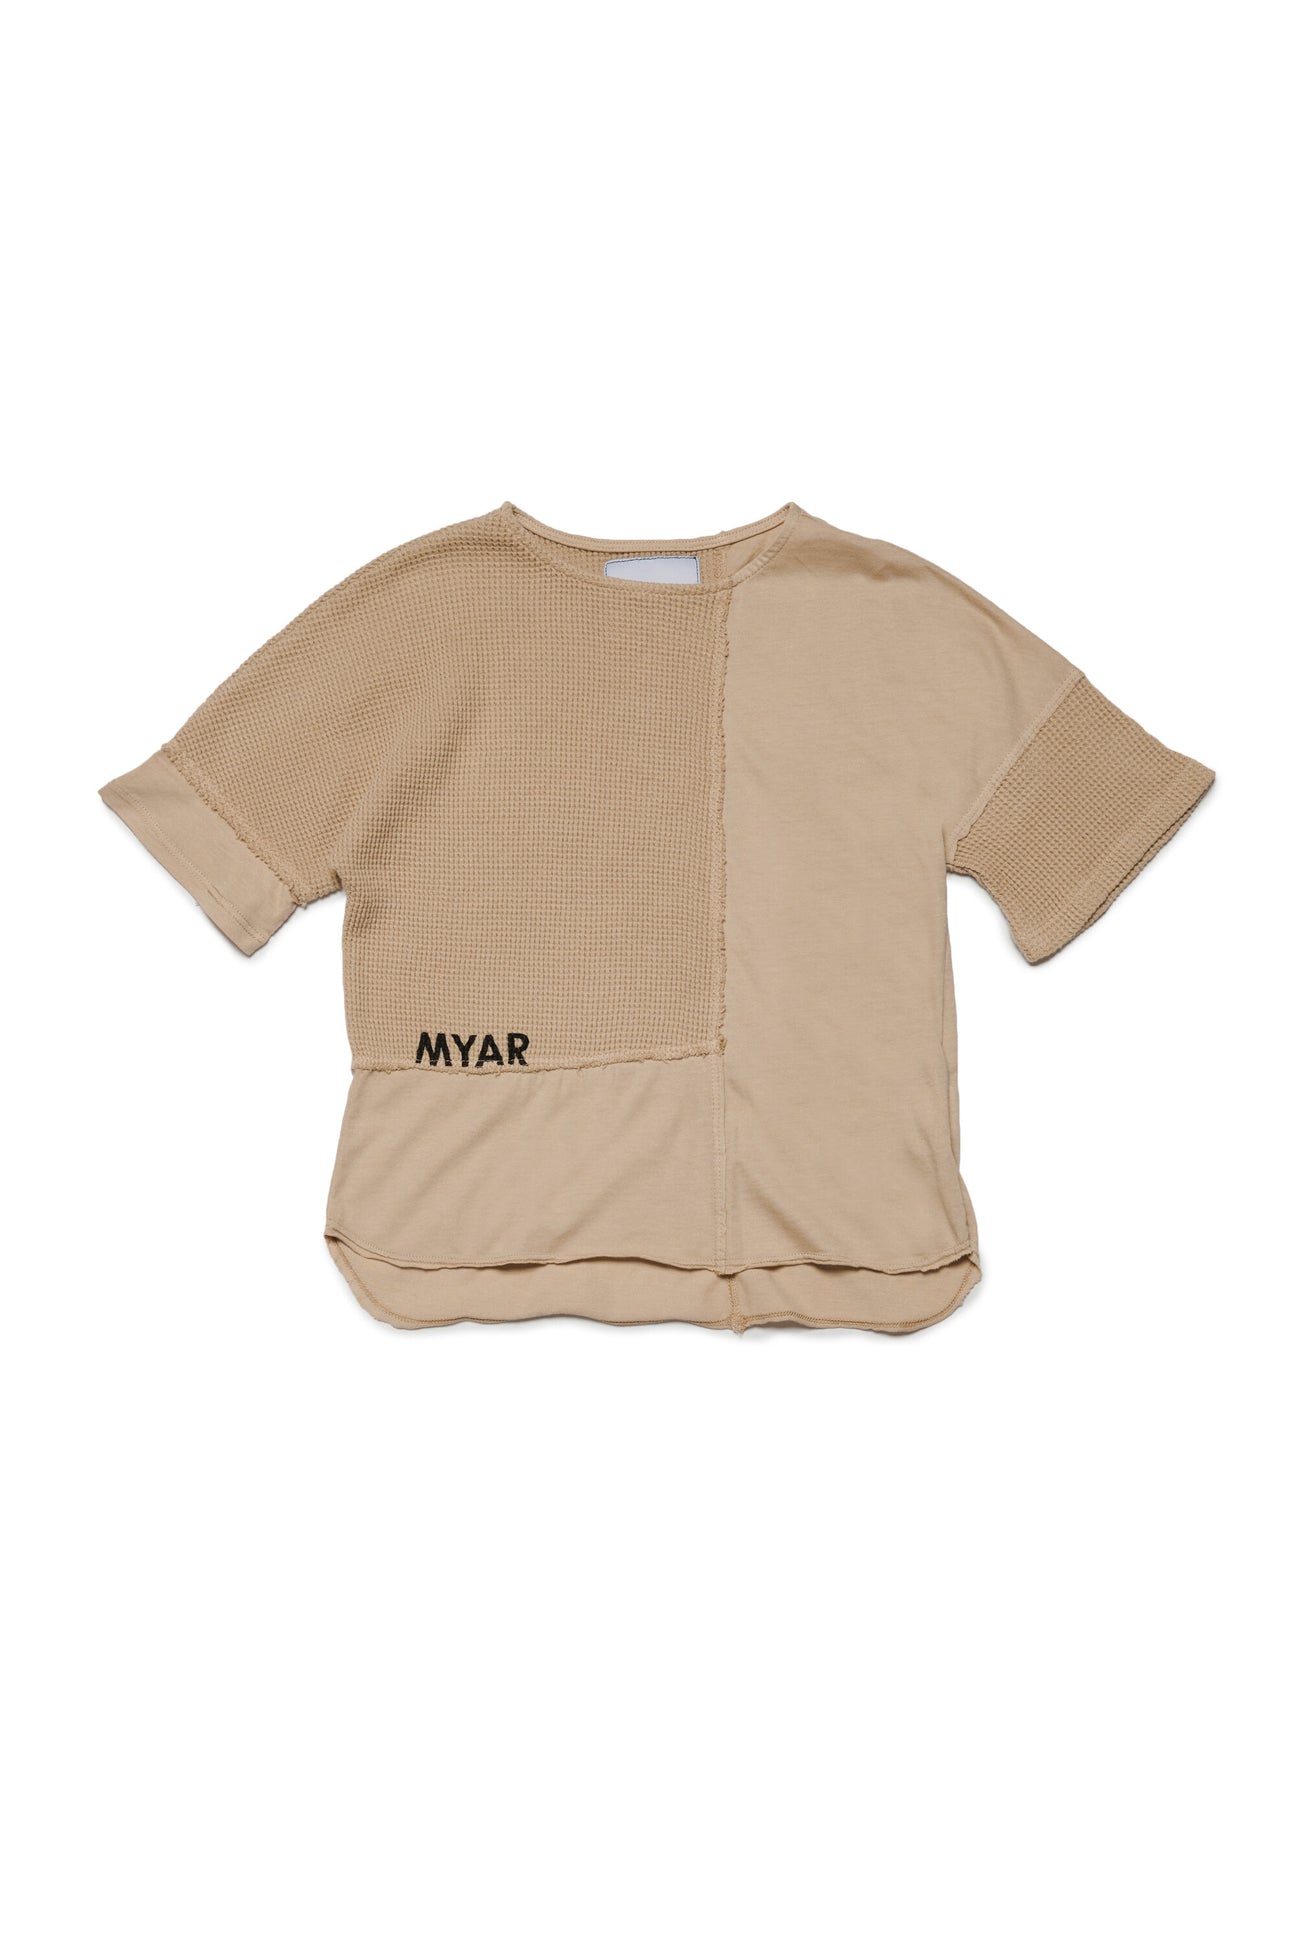 Deadstock fabric T-shirt with MYAR logo Deadstock fabric T-shirt with MYAR logo